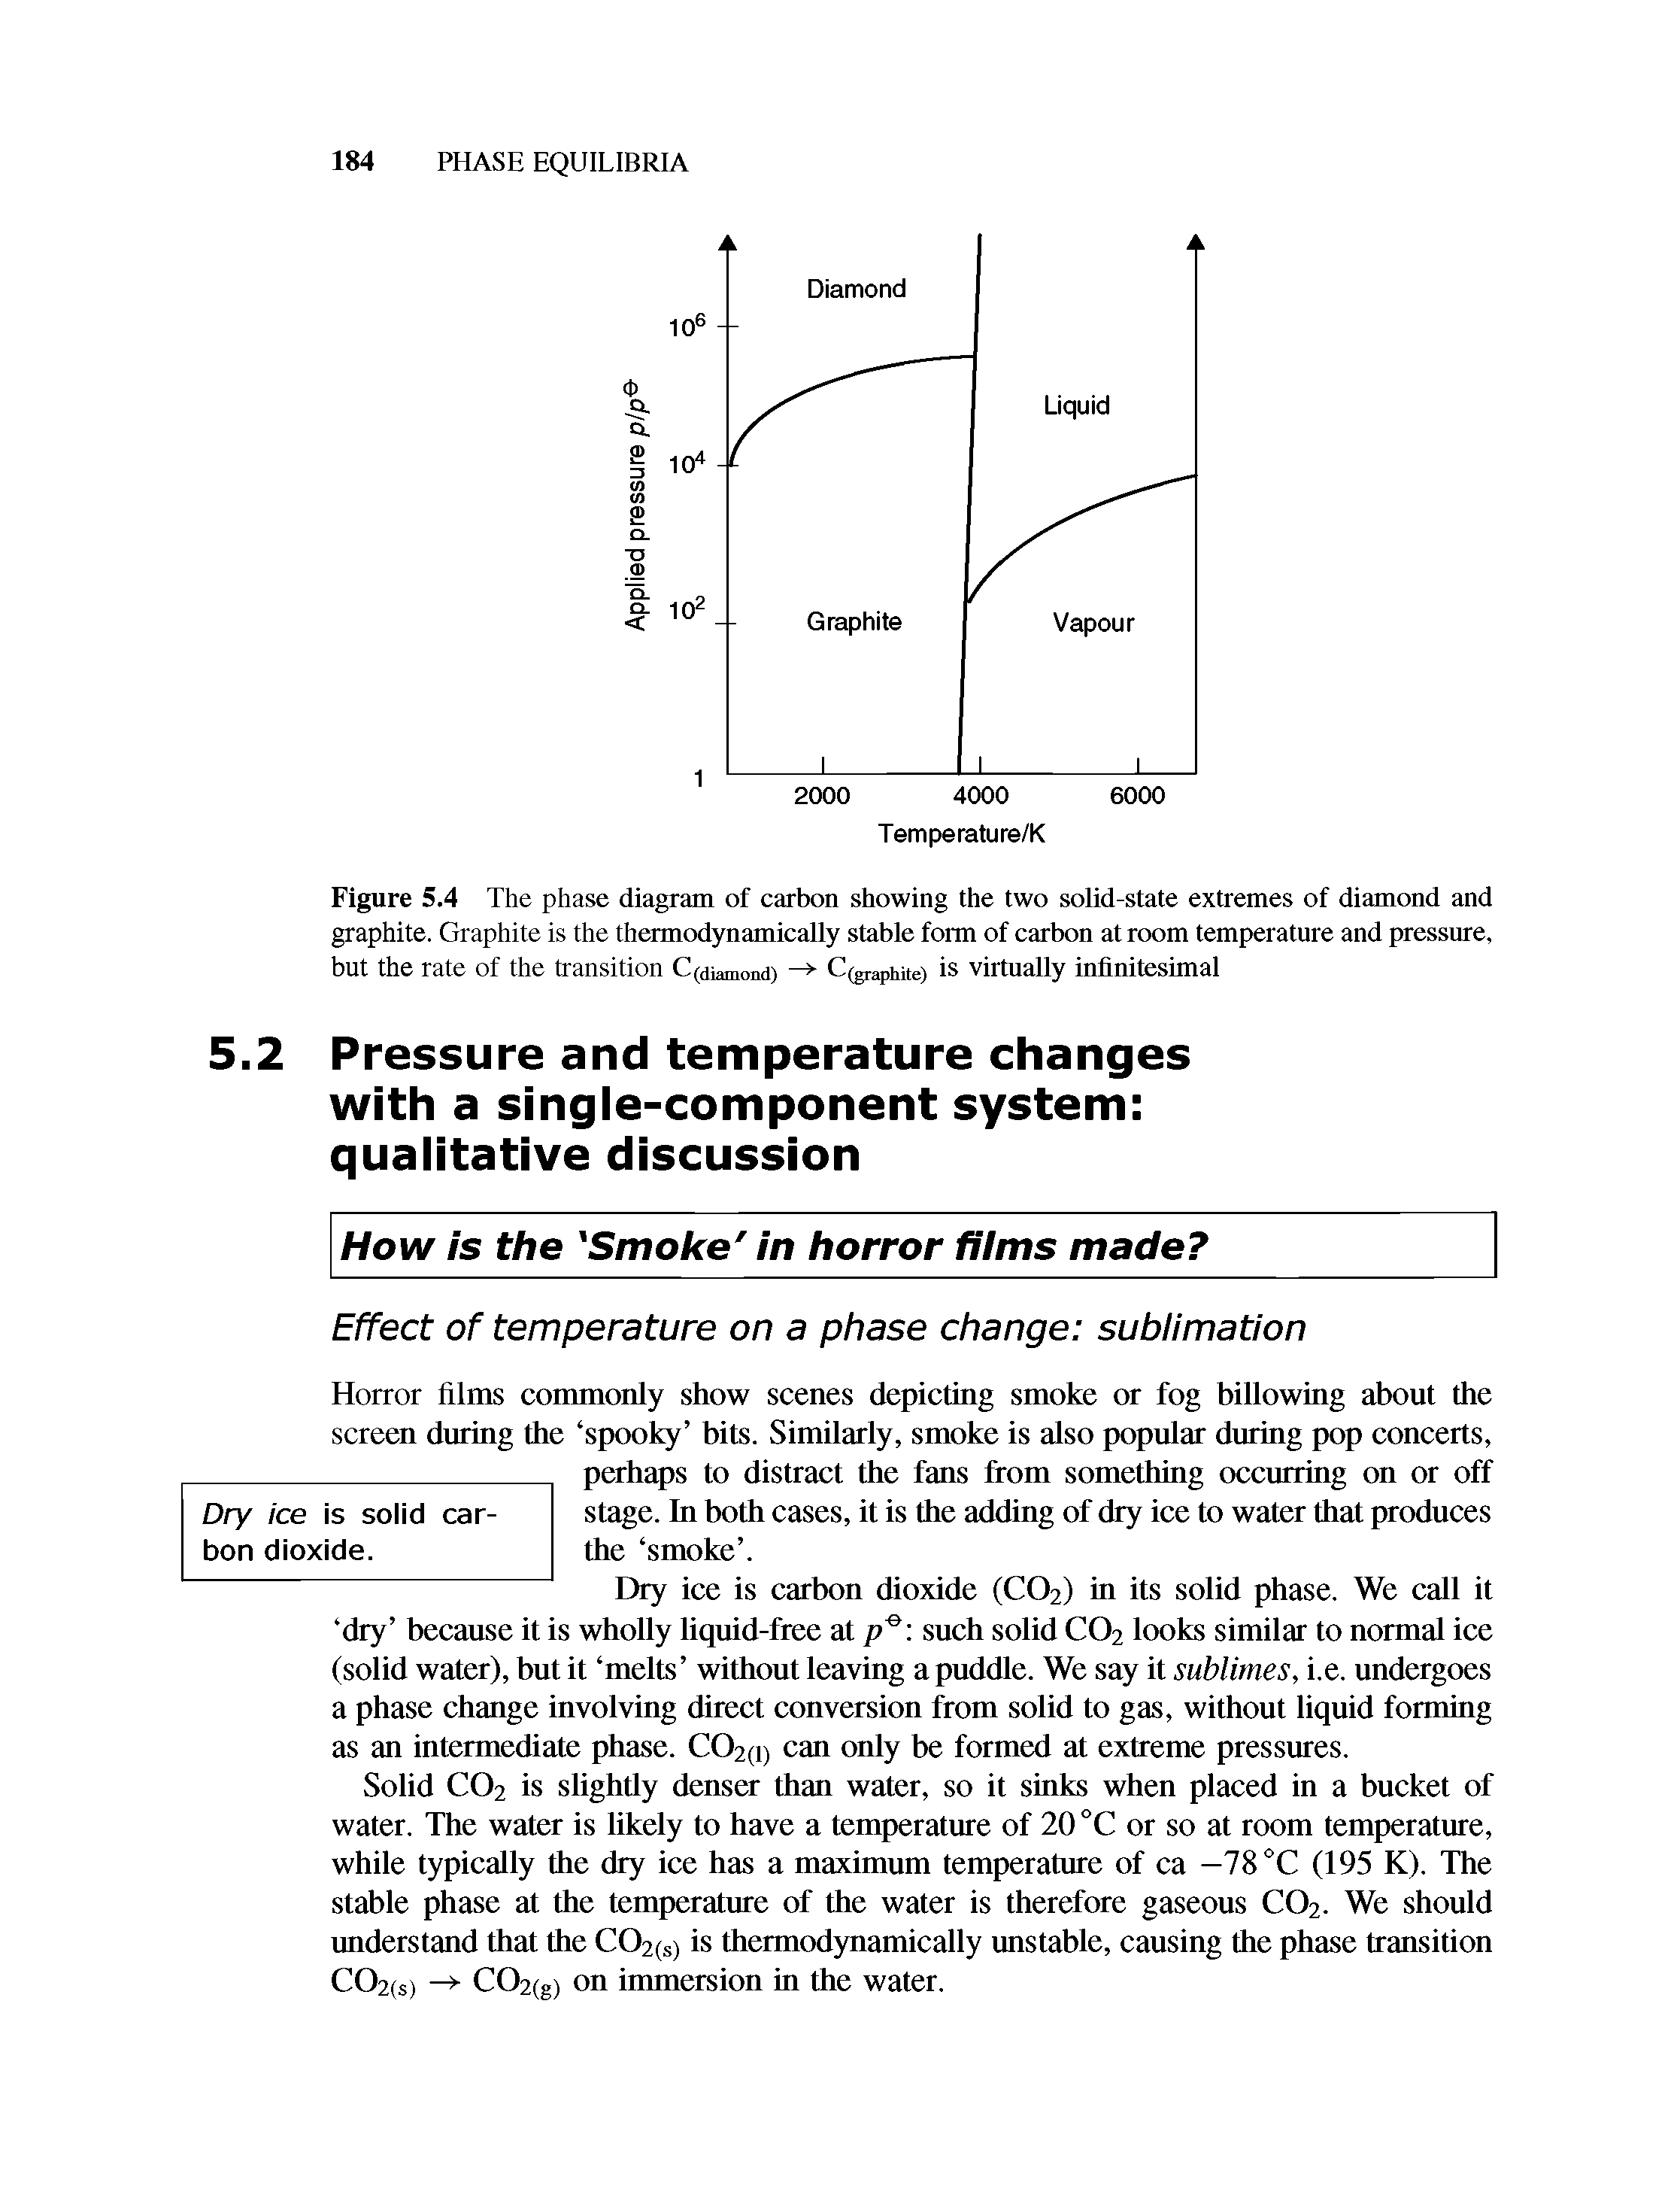 Figure 5.4 The phase diagram of carbon showing the two solid-state extremes of diamond and graphite. Graphite is the thermodynamically stable form of carbon at room temperature and pressure, but the rate of the transition C iamond) — C aphite) is virtually infinitesimal...